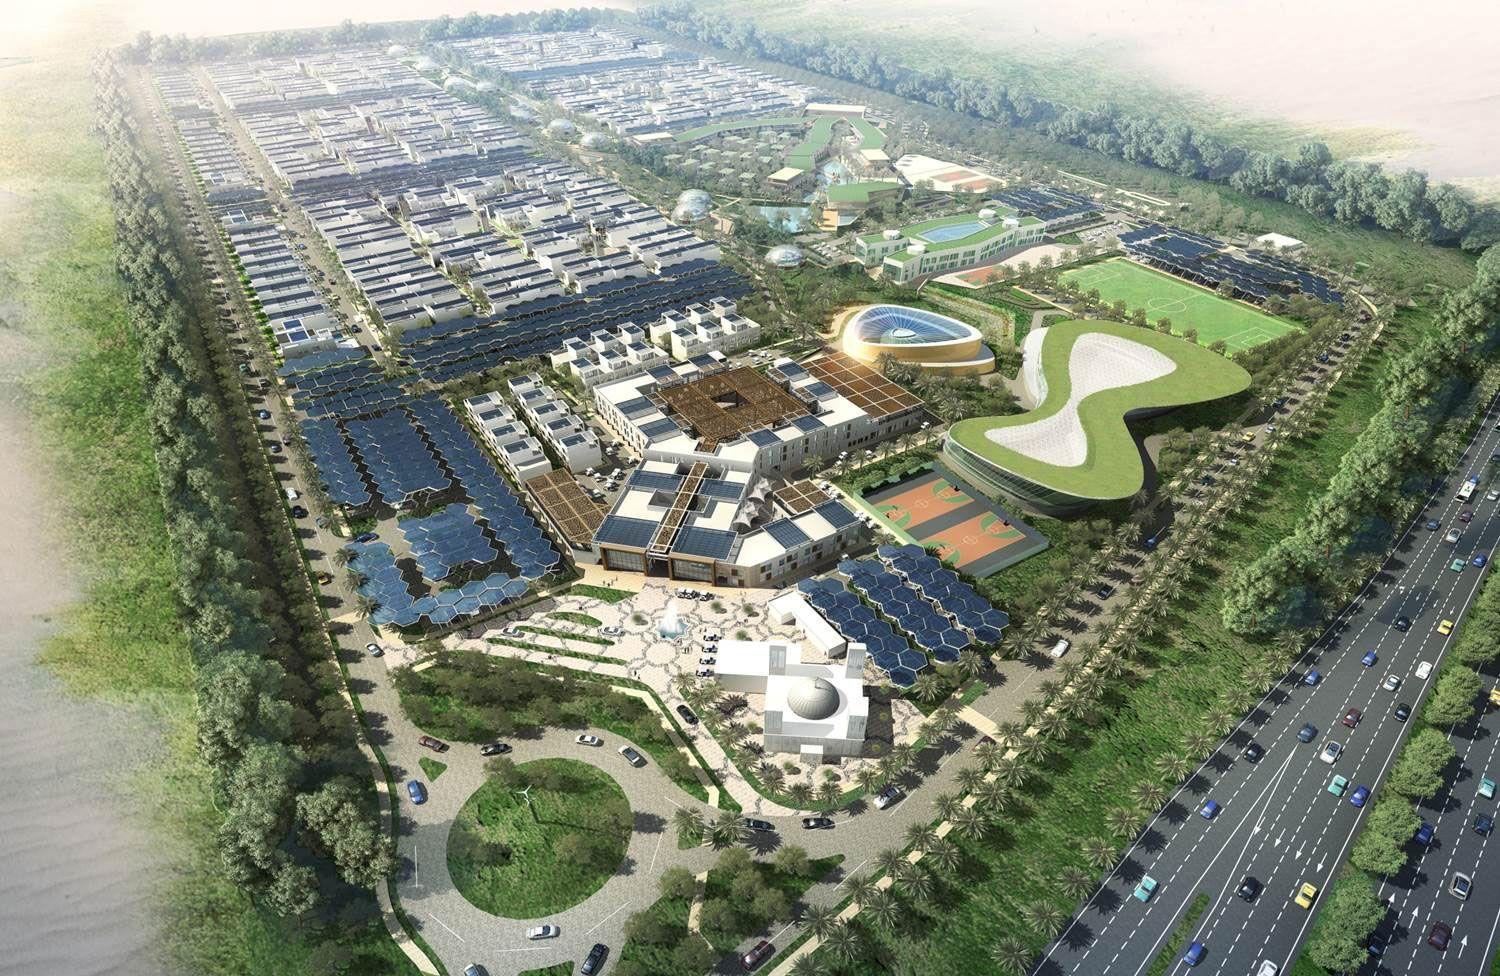 100% solar-powered hotel to open in Dubai by 2017 ...